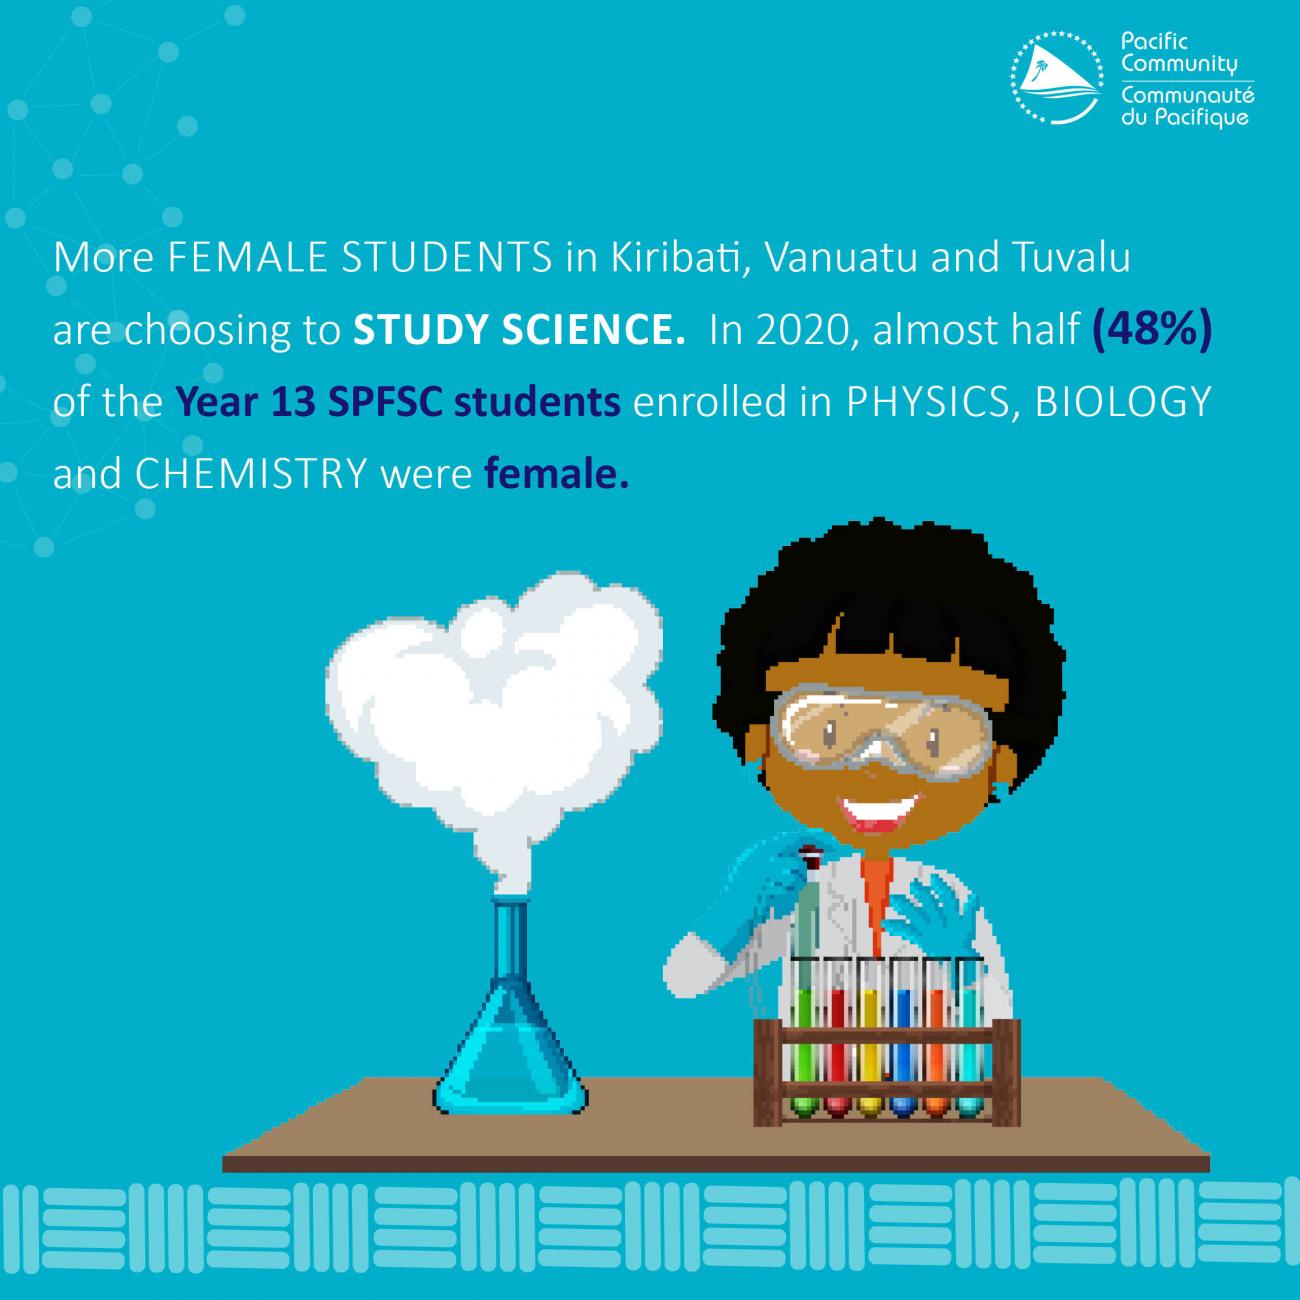 More female students in Kiribati, Vanuatu and Tuvalu are choosing to study science. In 2020, almost half (48%) of the Year 13 SPFSC students enrolled in physics, biology and chemistry were female. #EQAP #PacificEducation